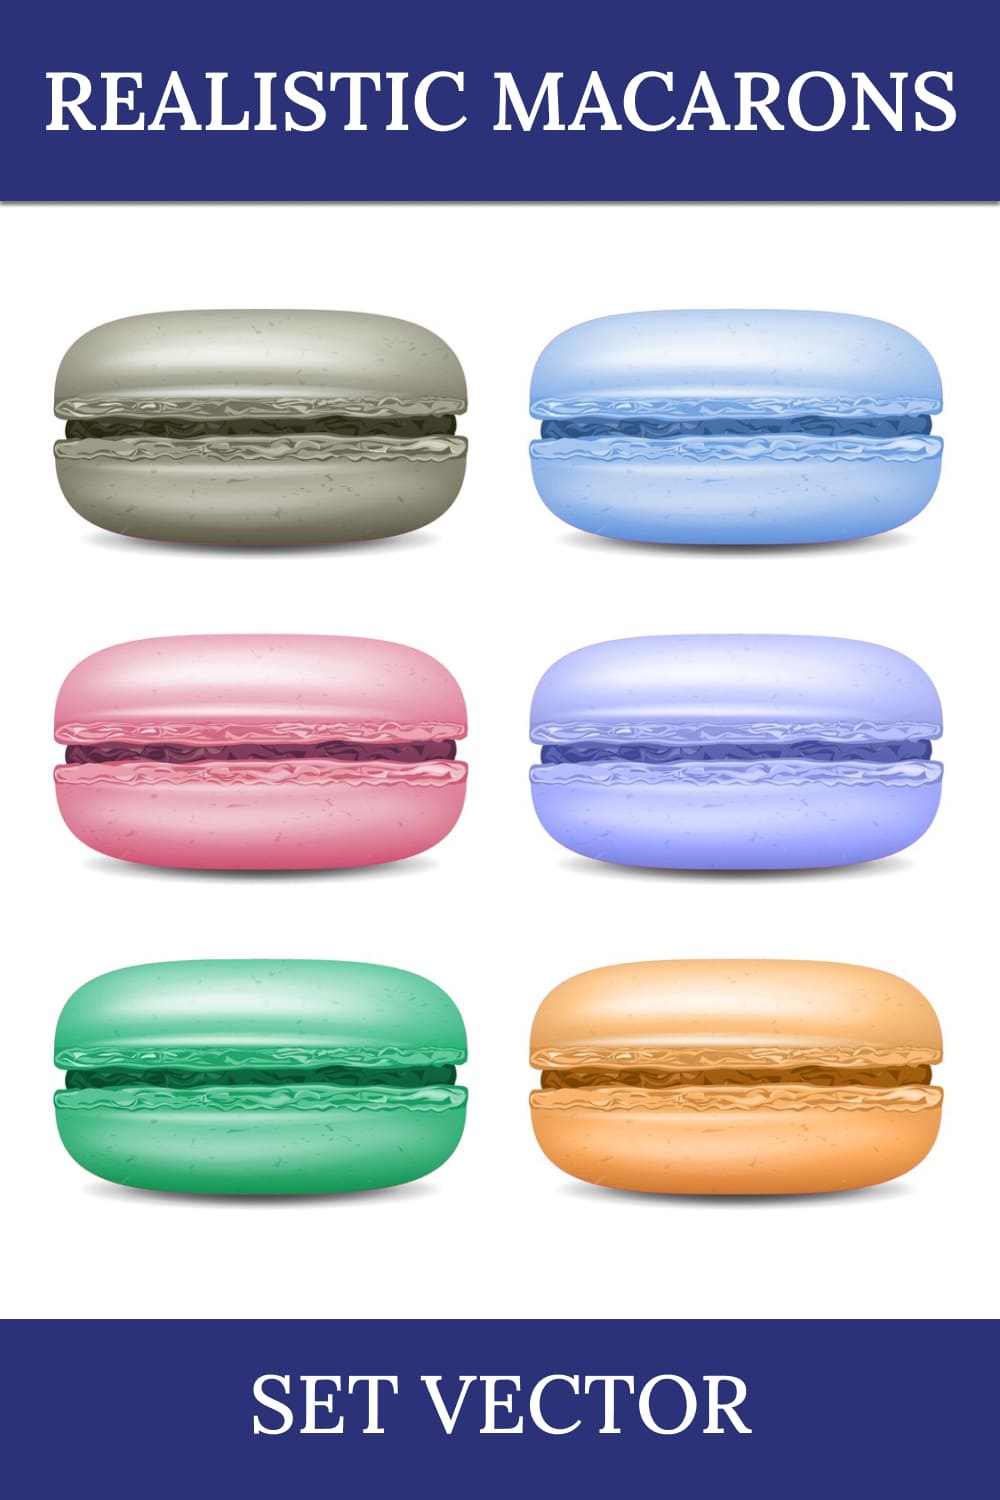 Realistic Macarons Set Vector. Detailed Colourful French - Pinterest.